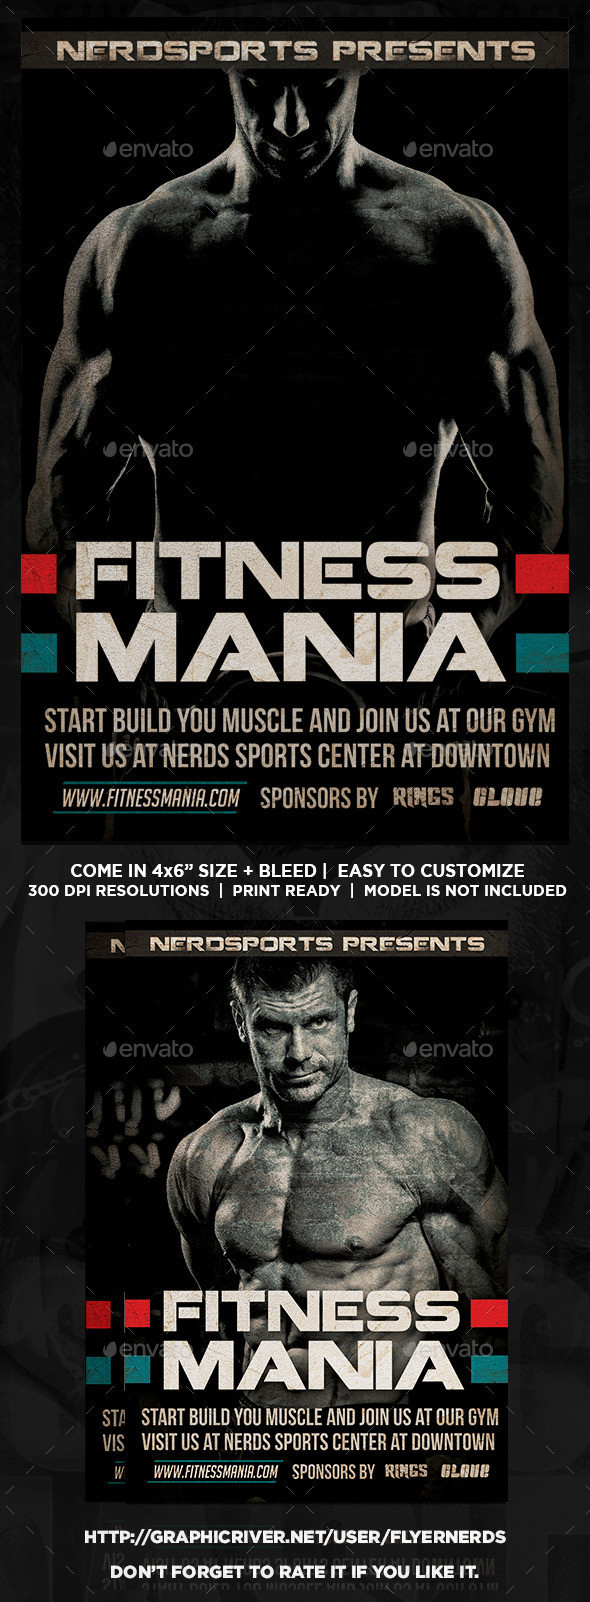 Fitness 20mania 20sports 20flyer 20preview